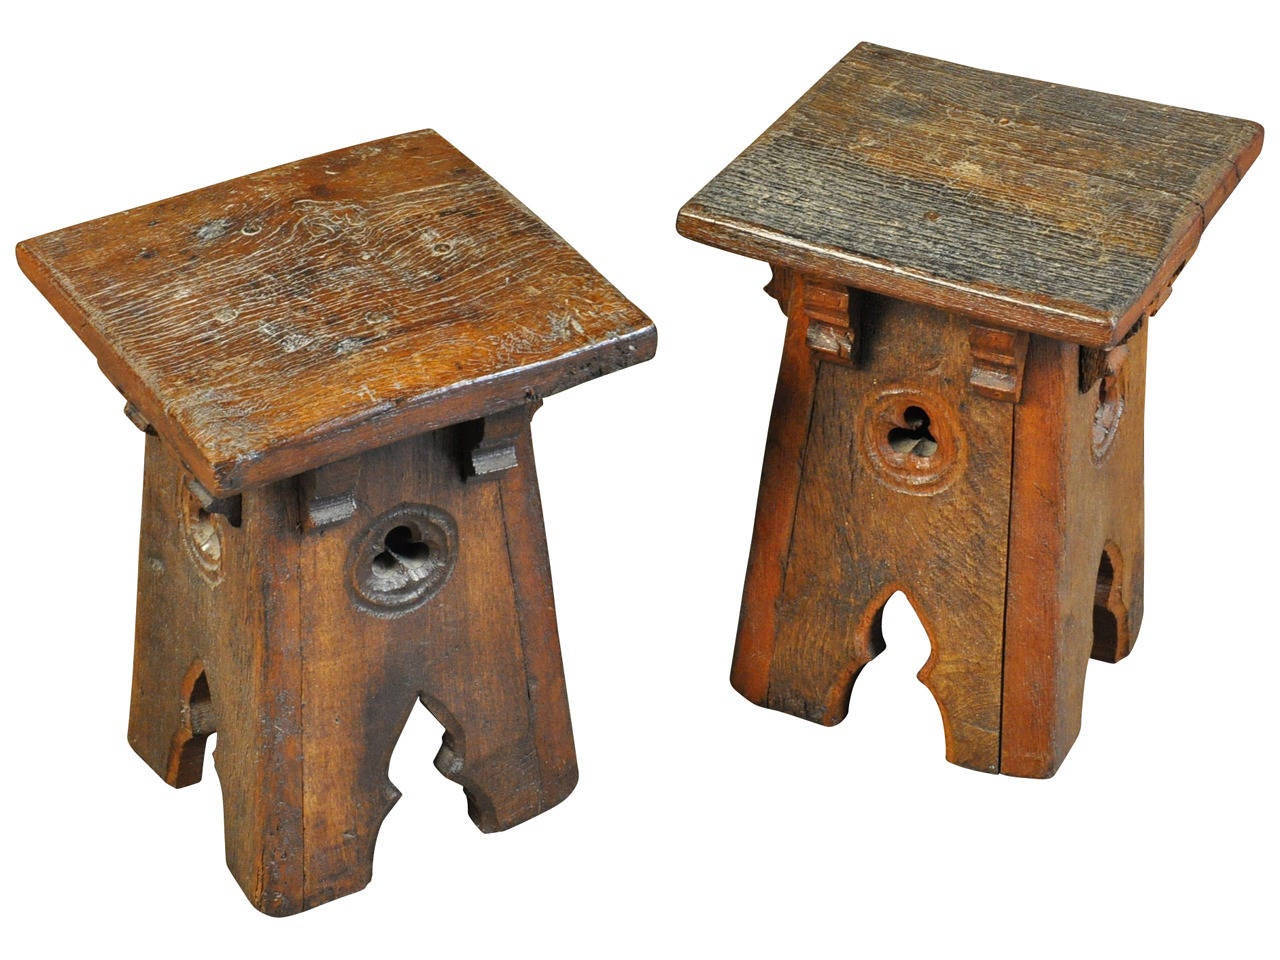 19th century French Provencal stools in the gothic style constructed from darkly stained oak.  Wonderful not only as stools but serve nicely as smaller pedestals or plant stands.  The price listed is for a pair.  There are a total of three stools. 